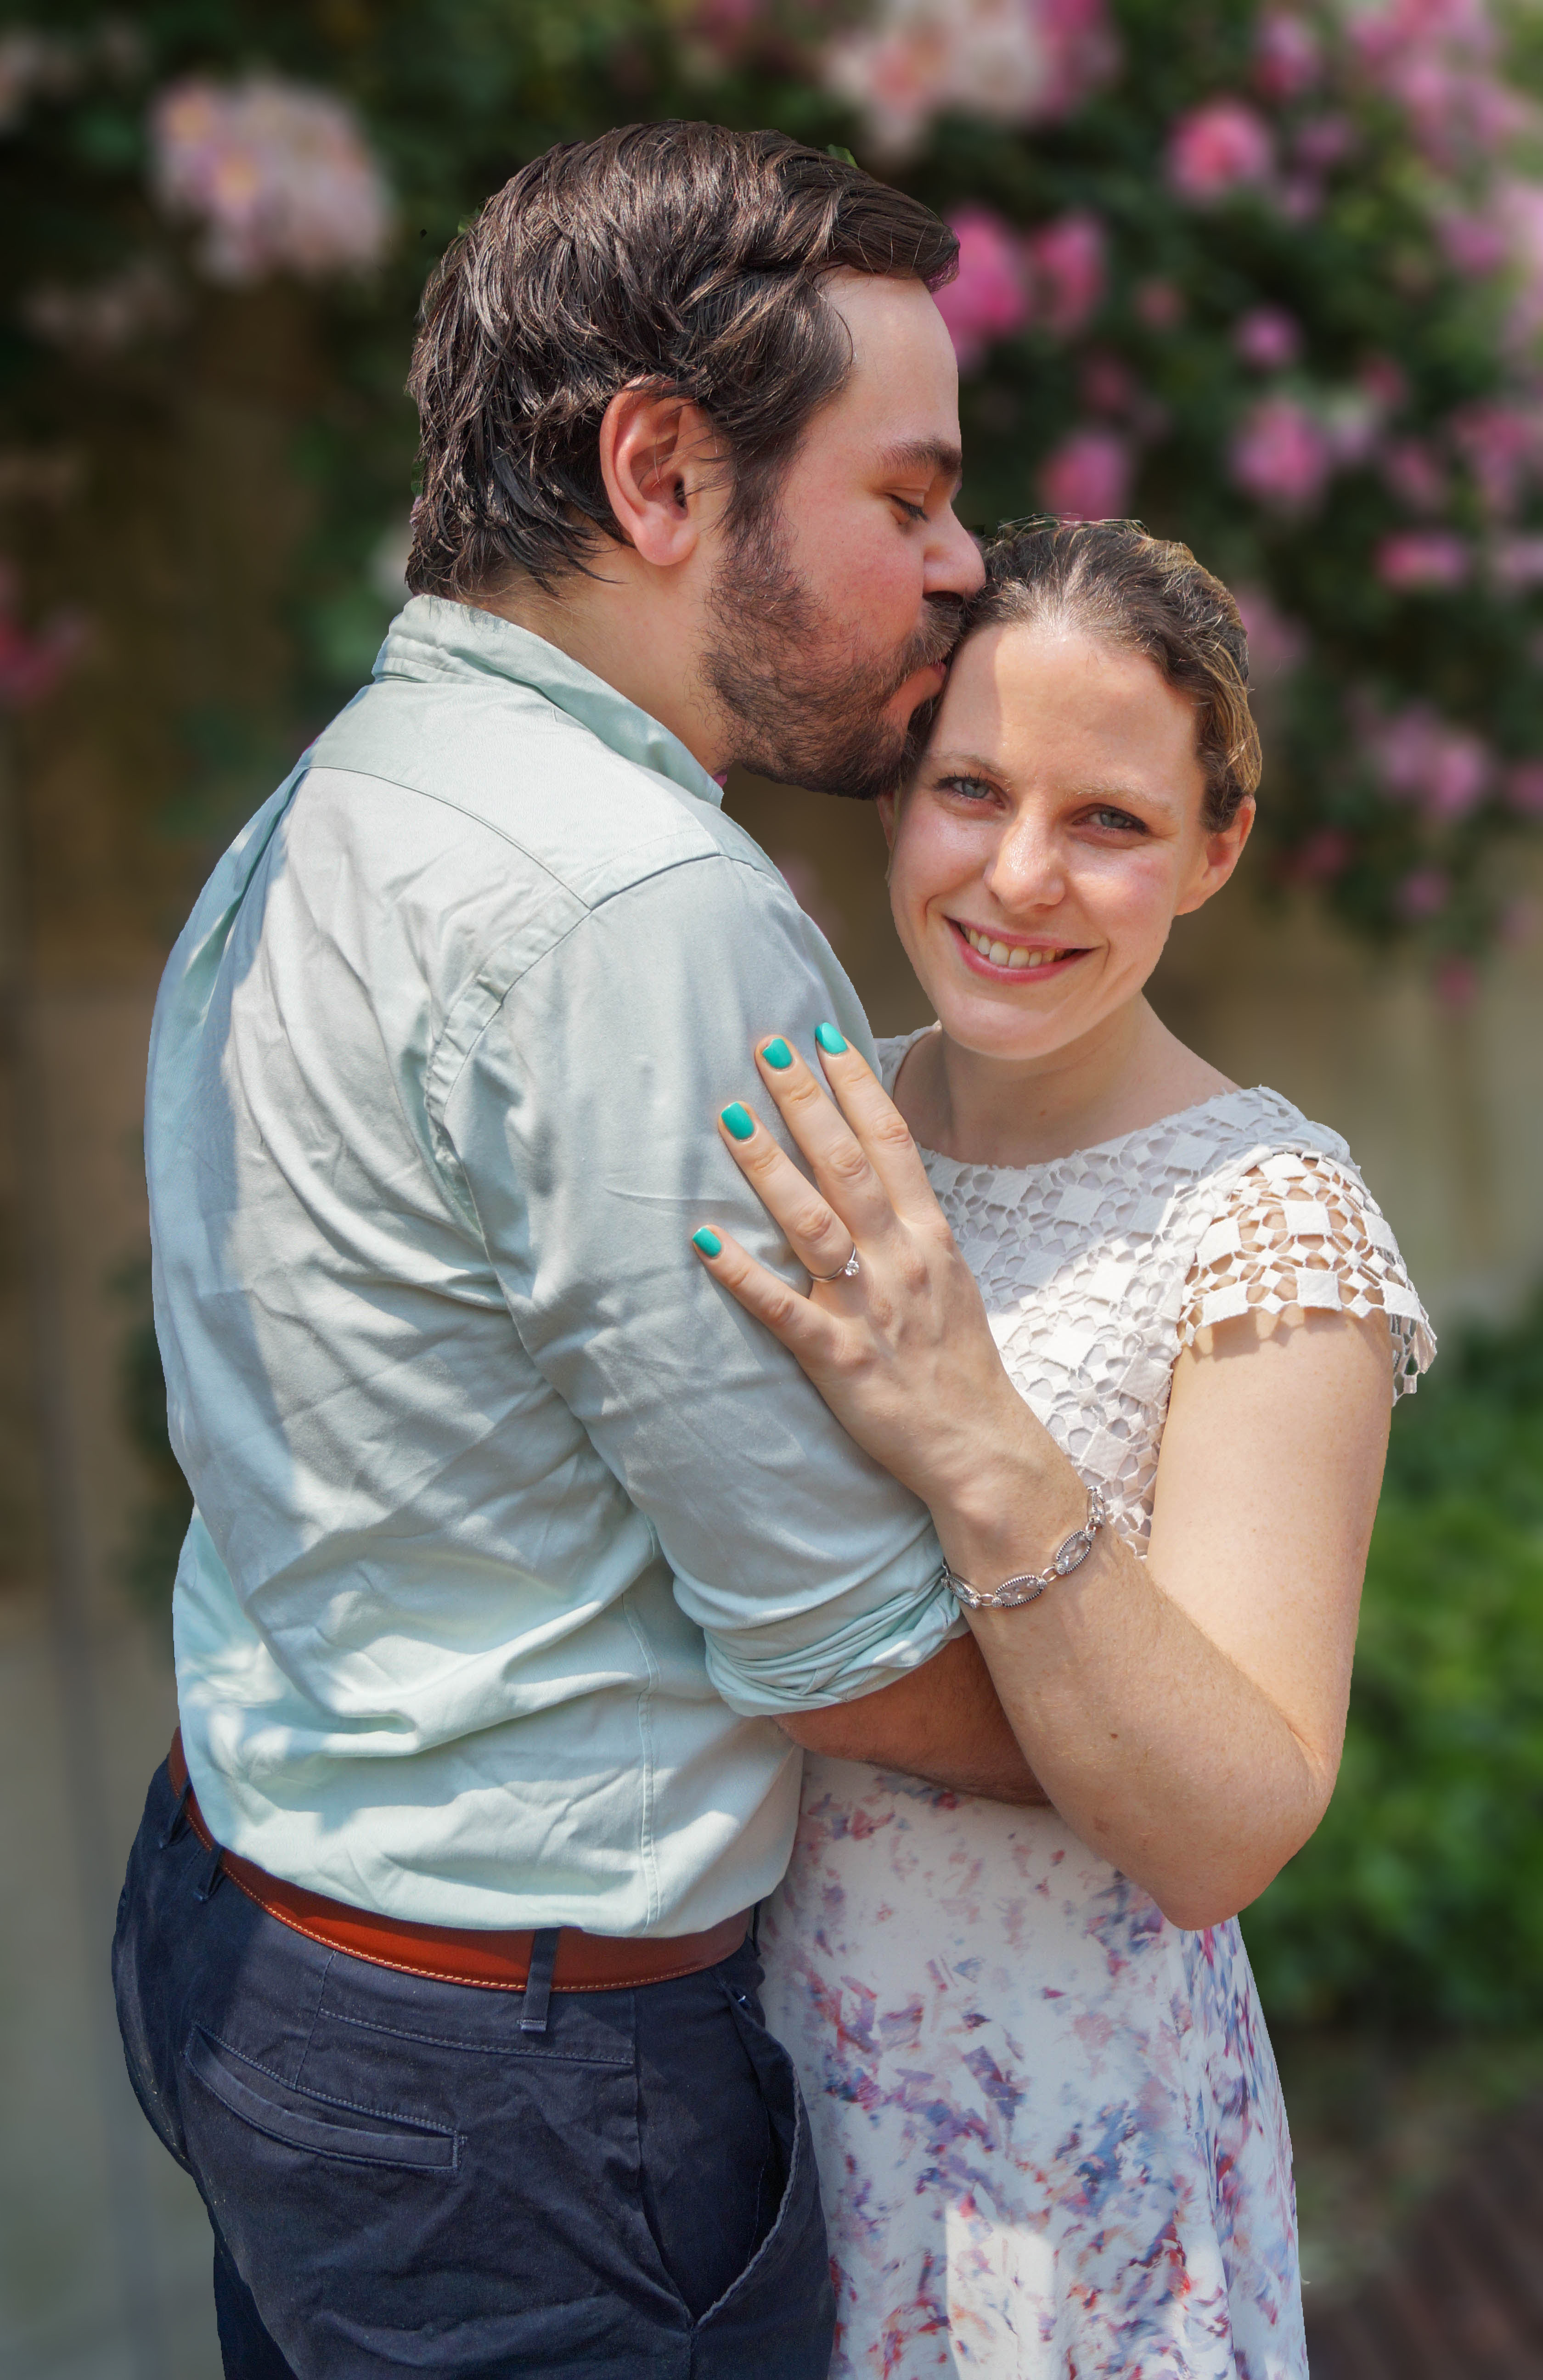 David and Lucy engagement photos final copies 2018 8jpg